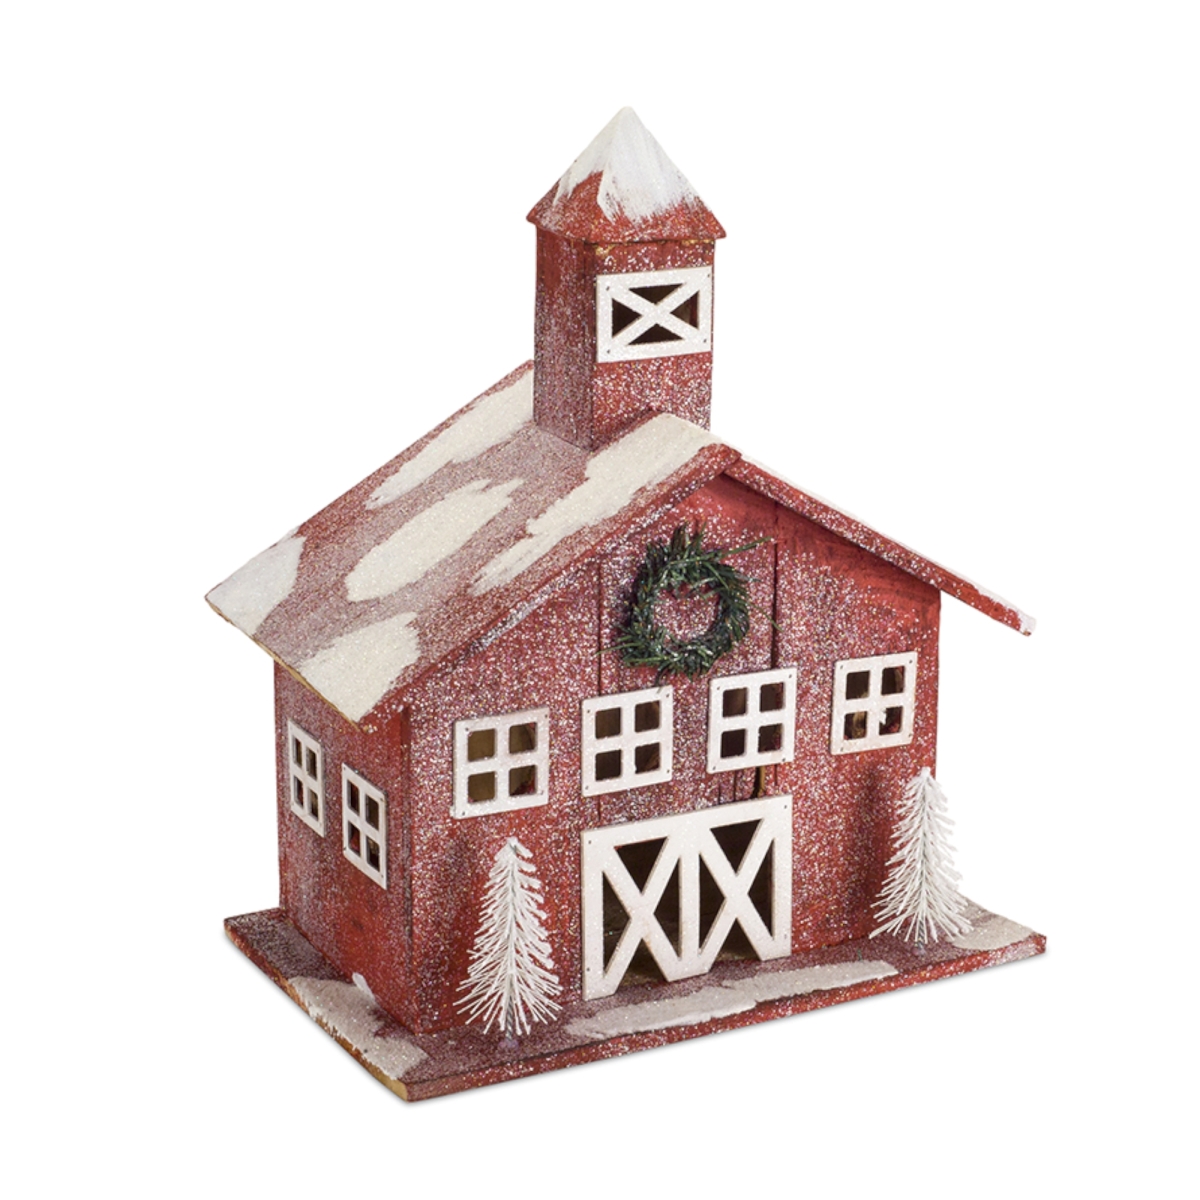 73551ds 17.5 X 9.5 In. Large Barn, White & Red